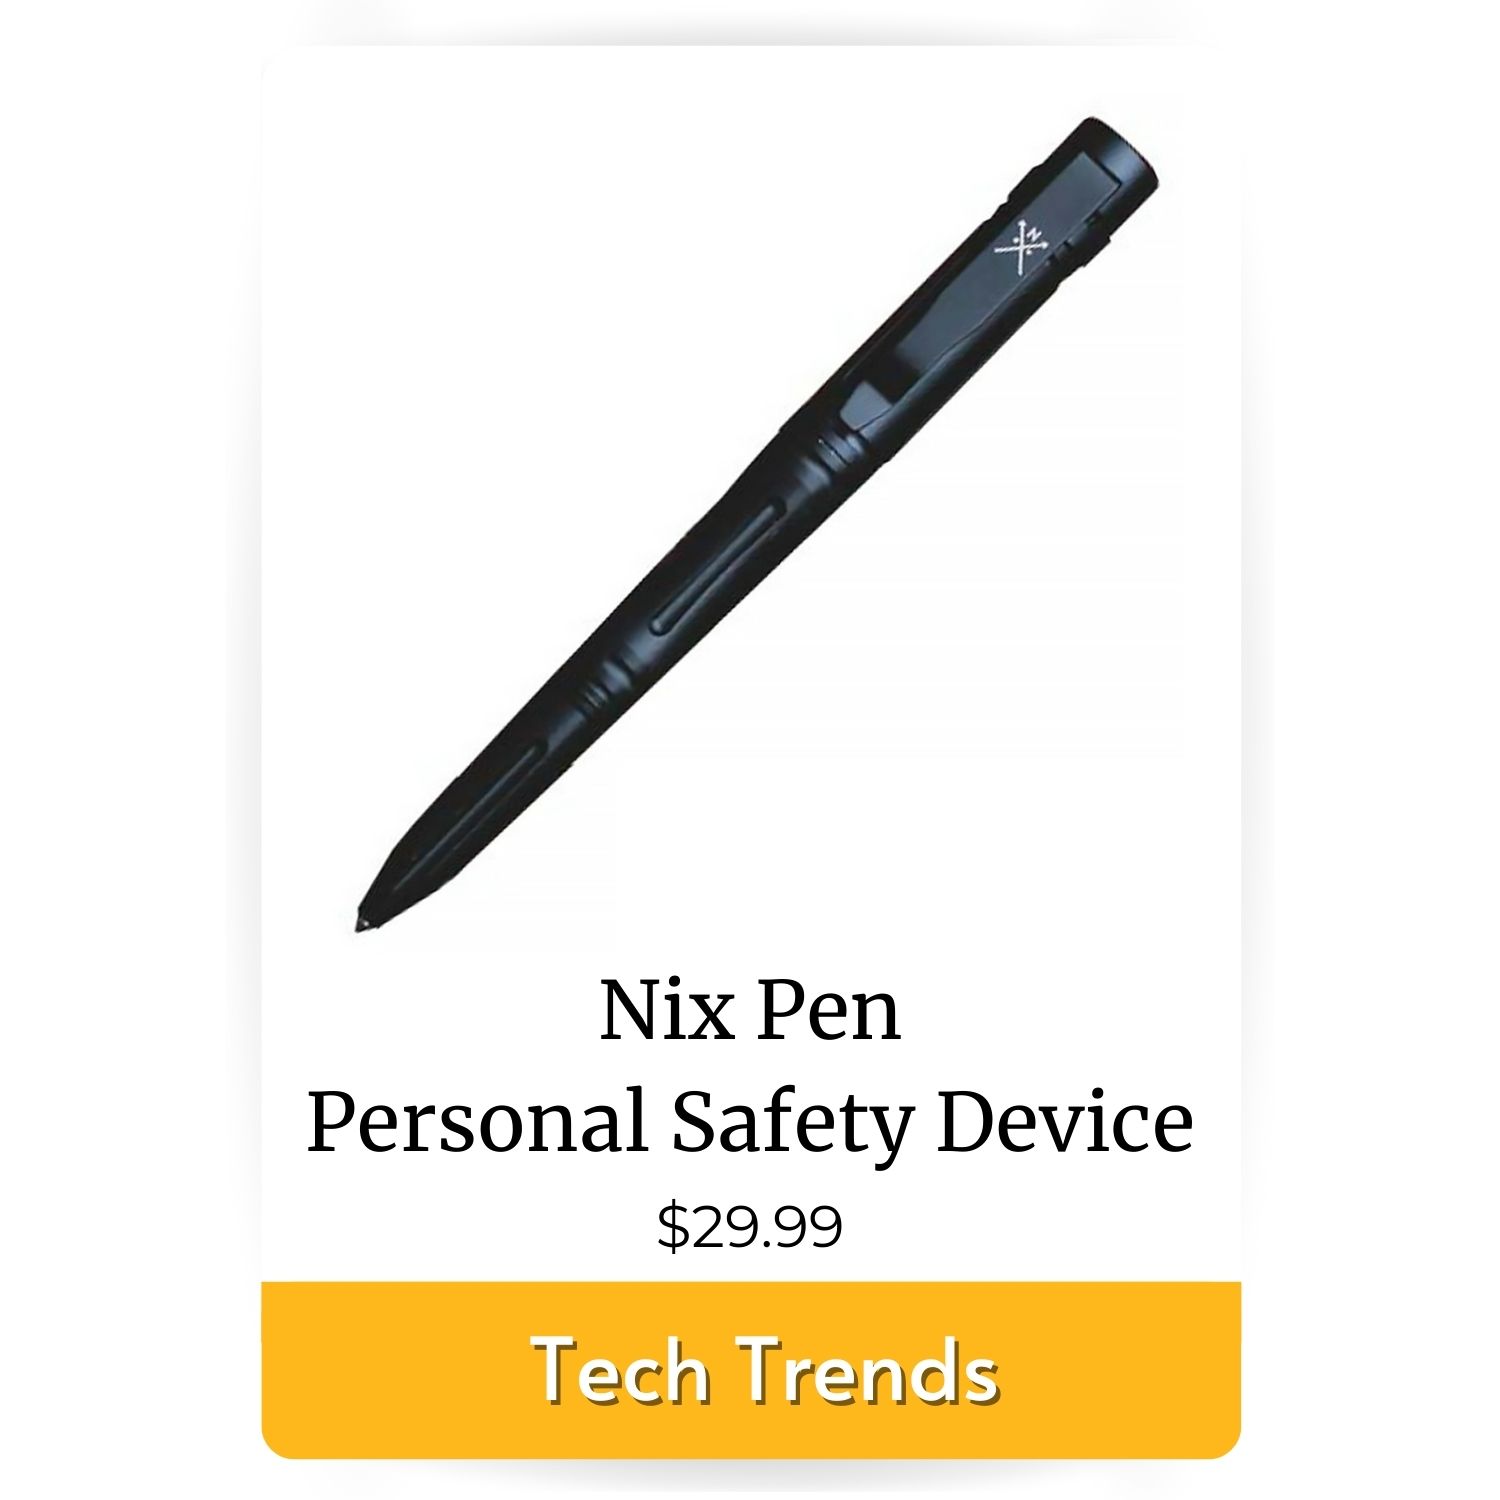 tech trends featured product Nix Pen Personal Safety Device 29.99 dollars